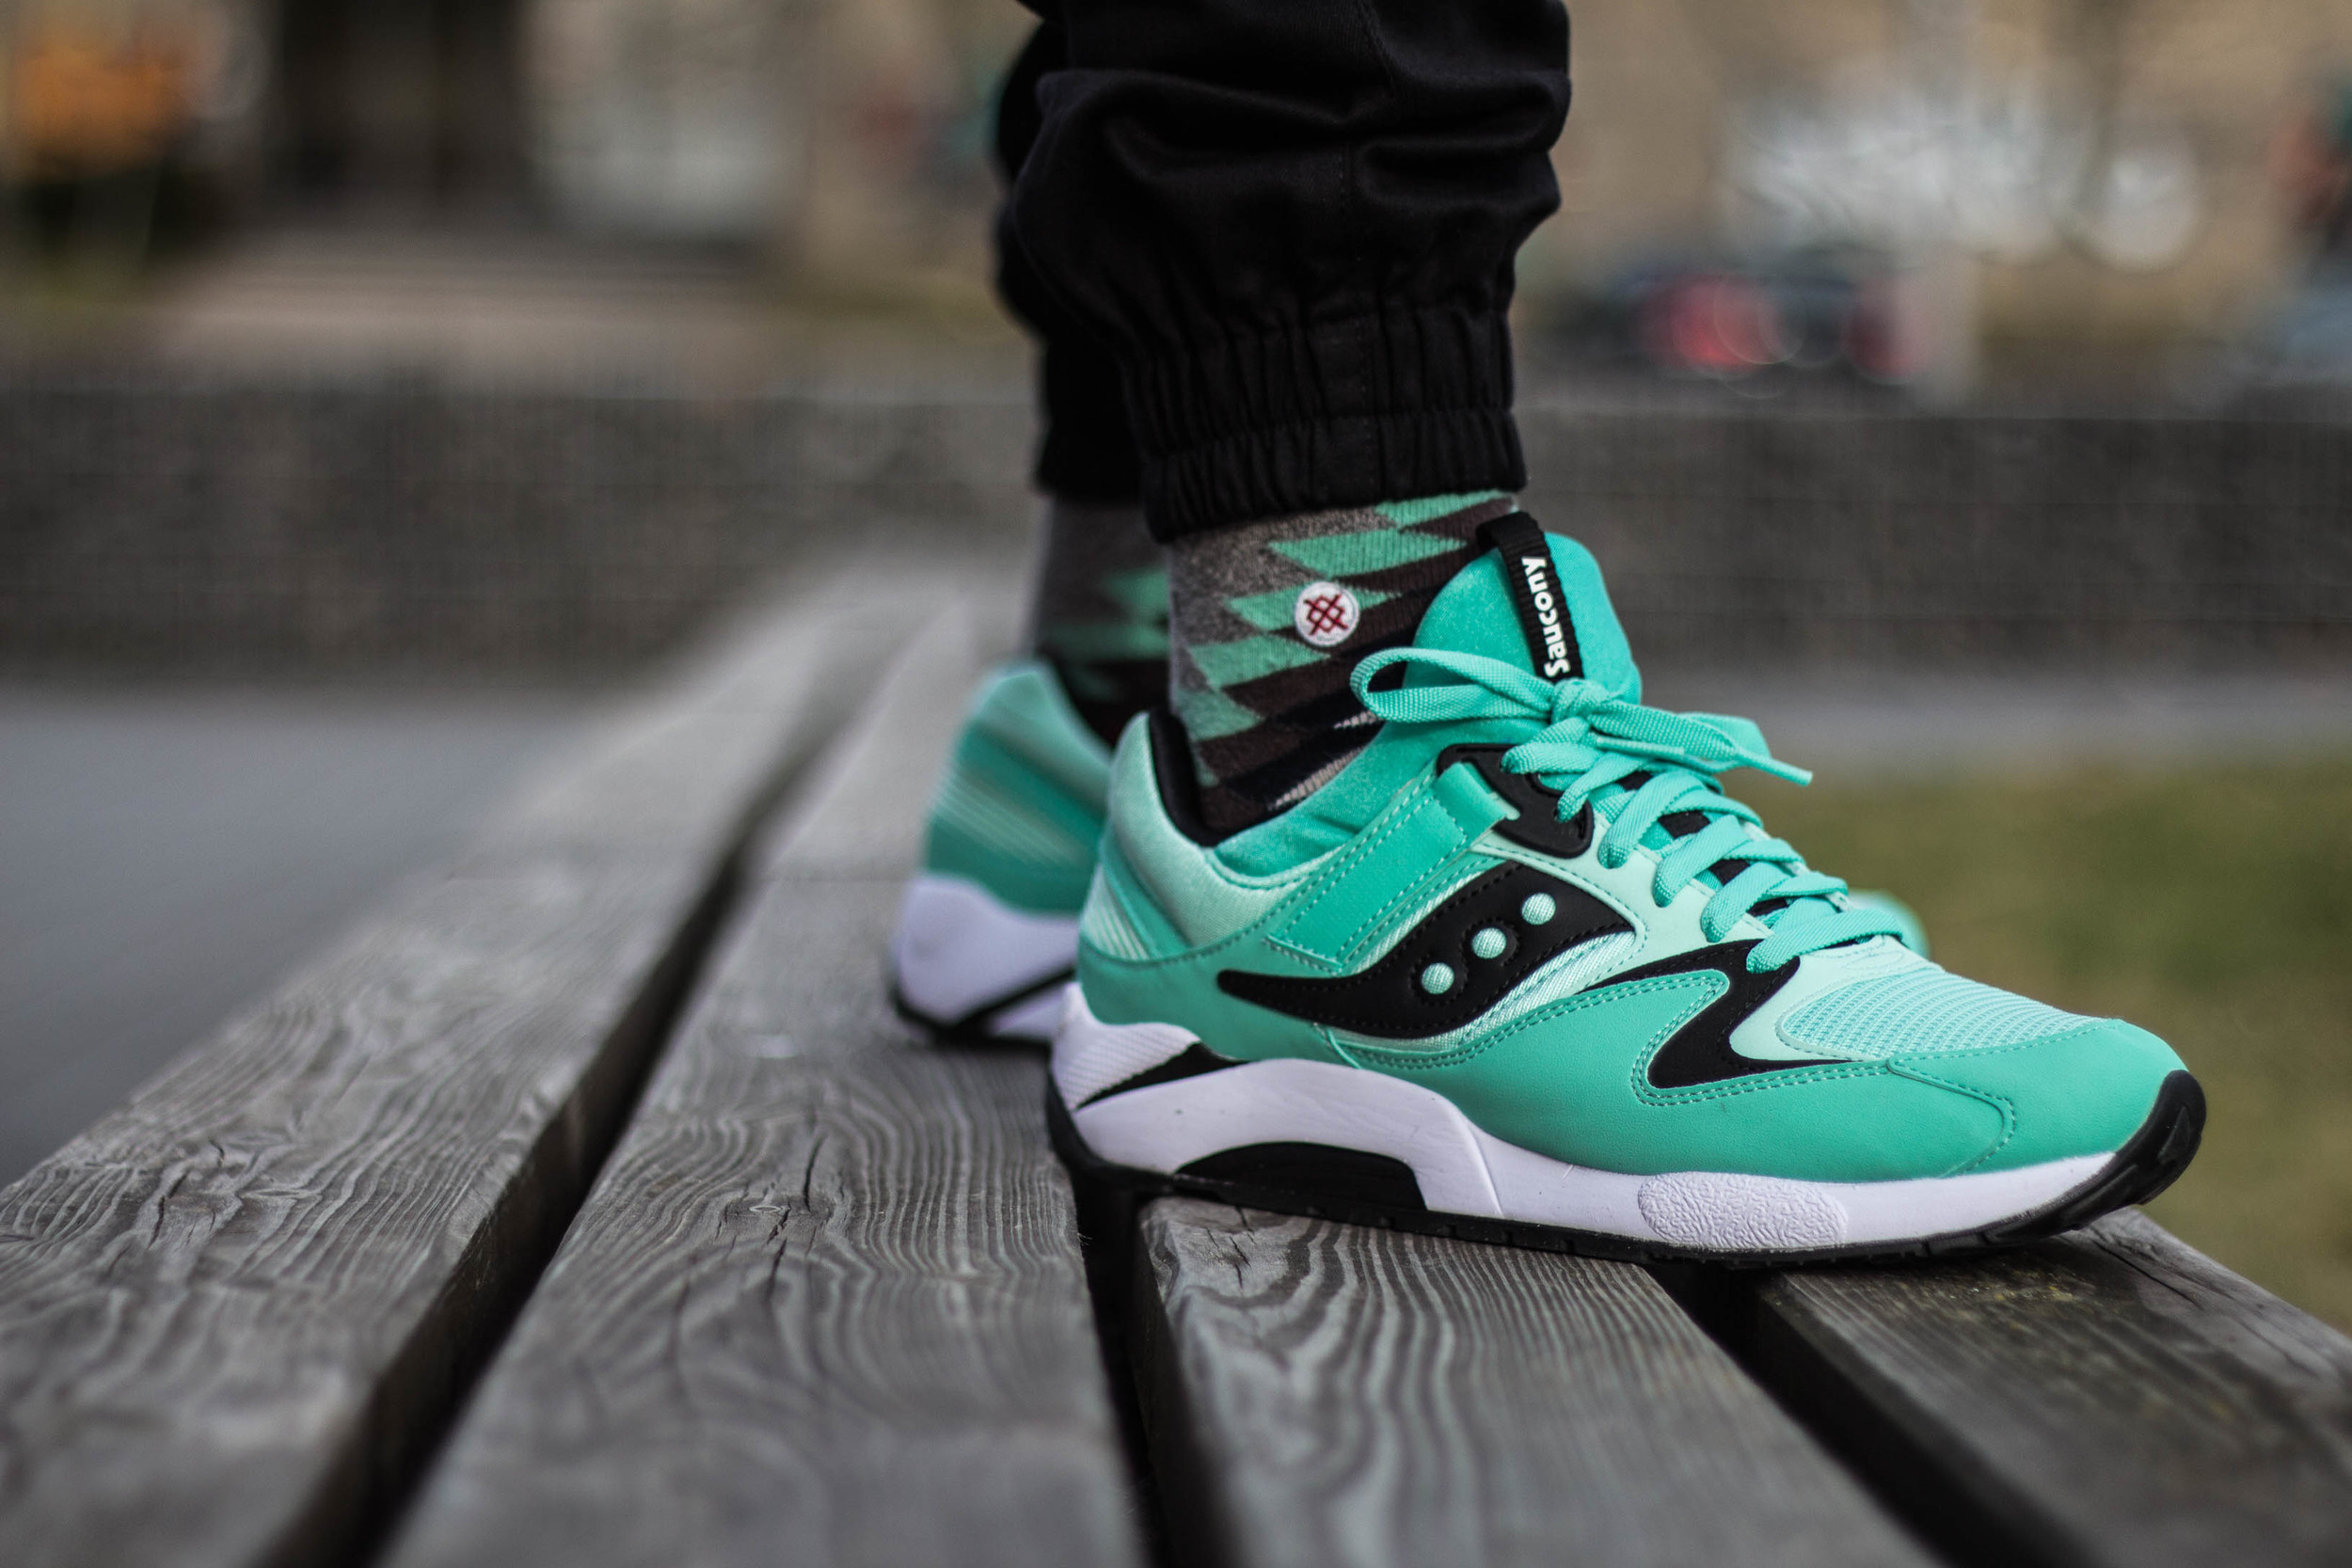 Deal of the Day: Saucony GRID 9000 